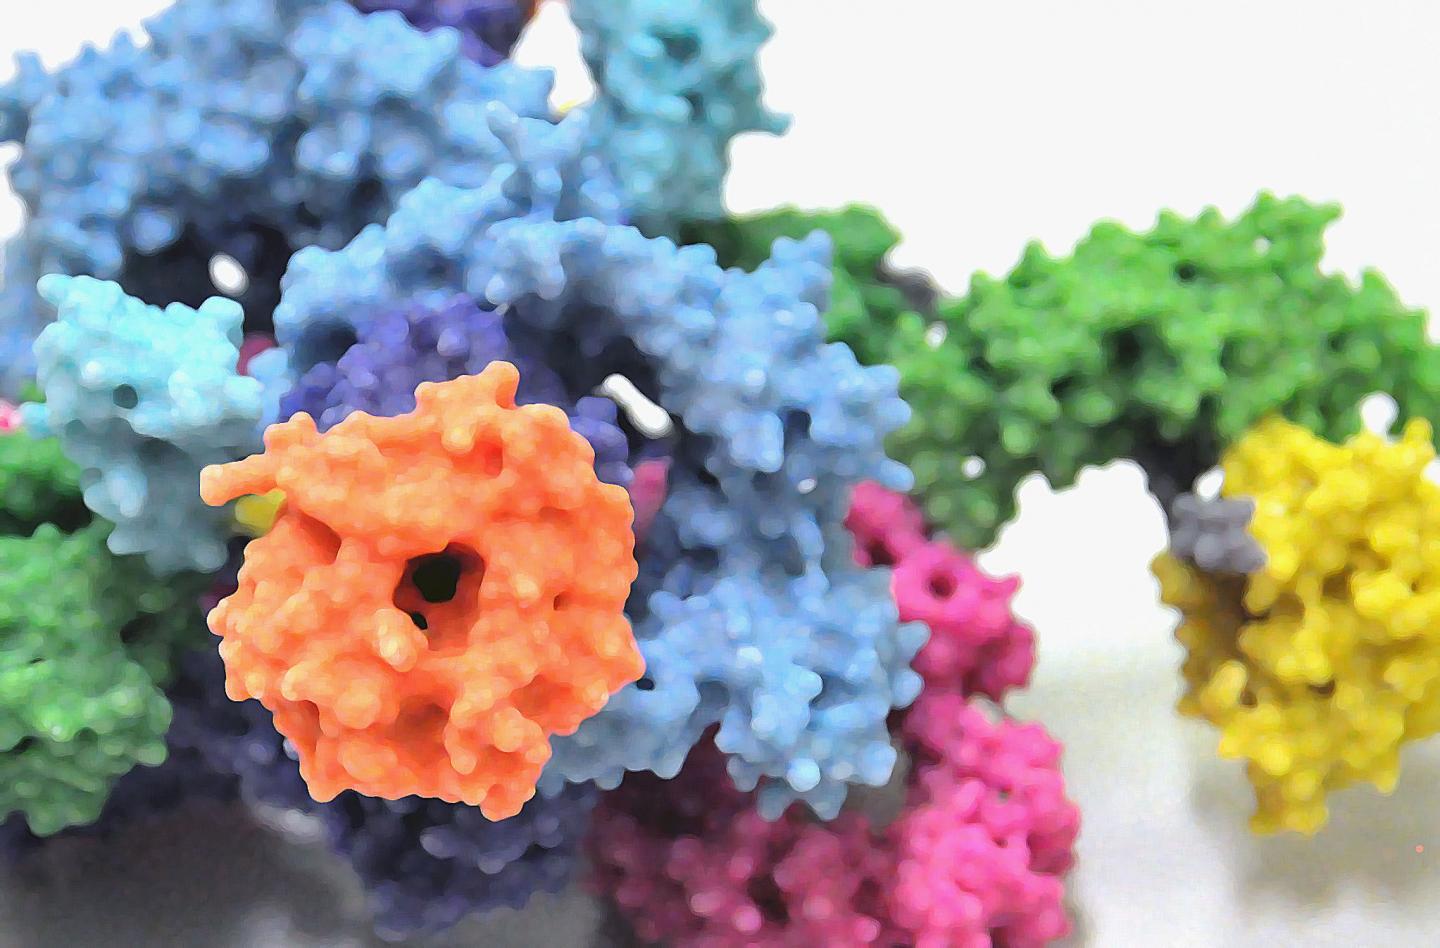 Image: The image depicts a three-dimensional model of the protein complex mTORC1 (Photo courtesy of the University of Basel).